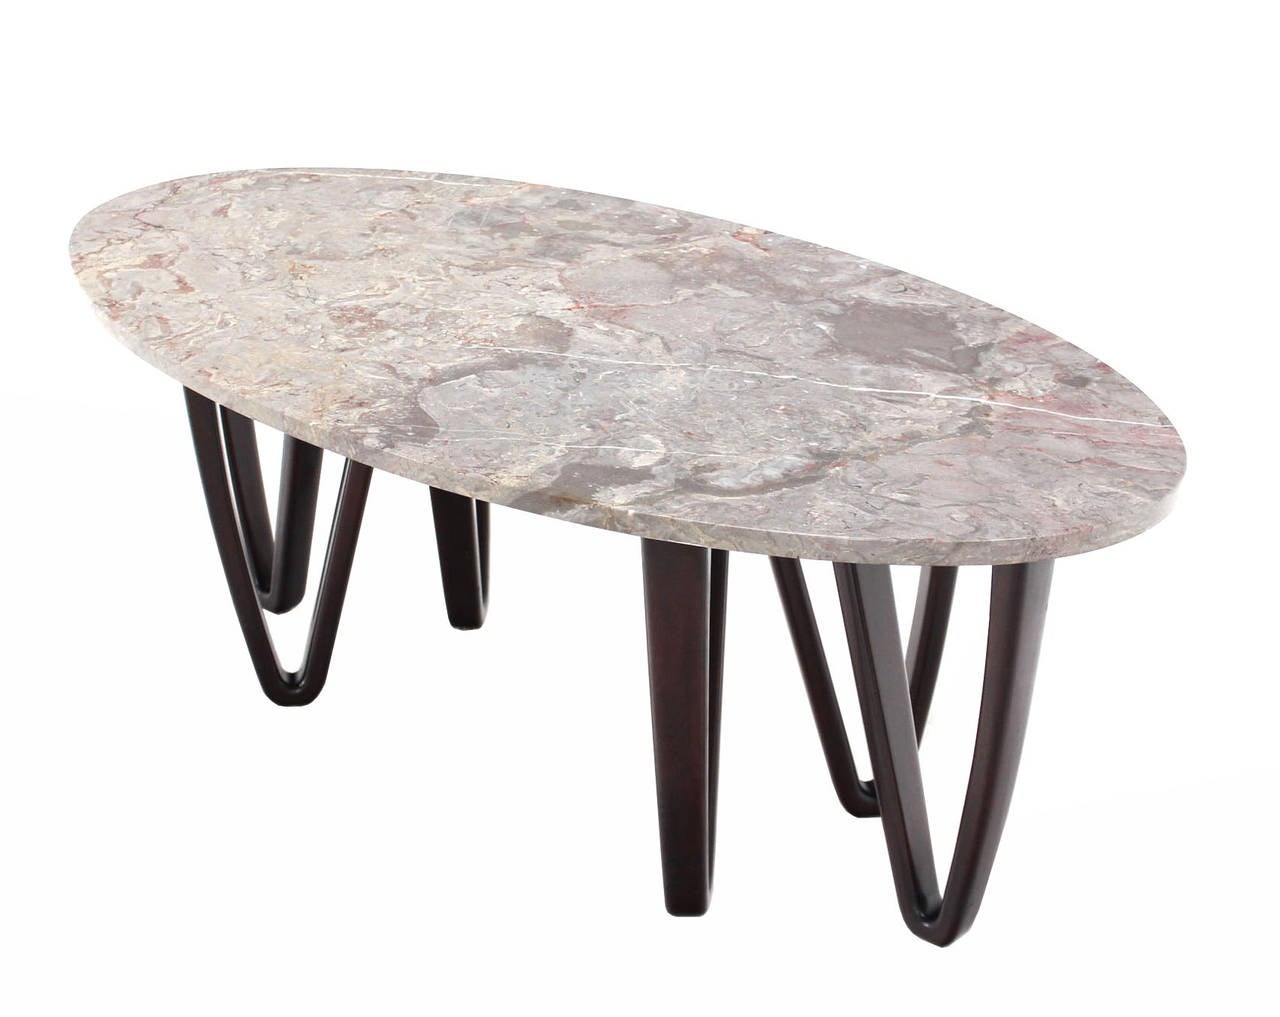 American Oval Marble-Top Coffee Table on Wooden Hair Pin Legs